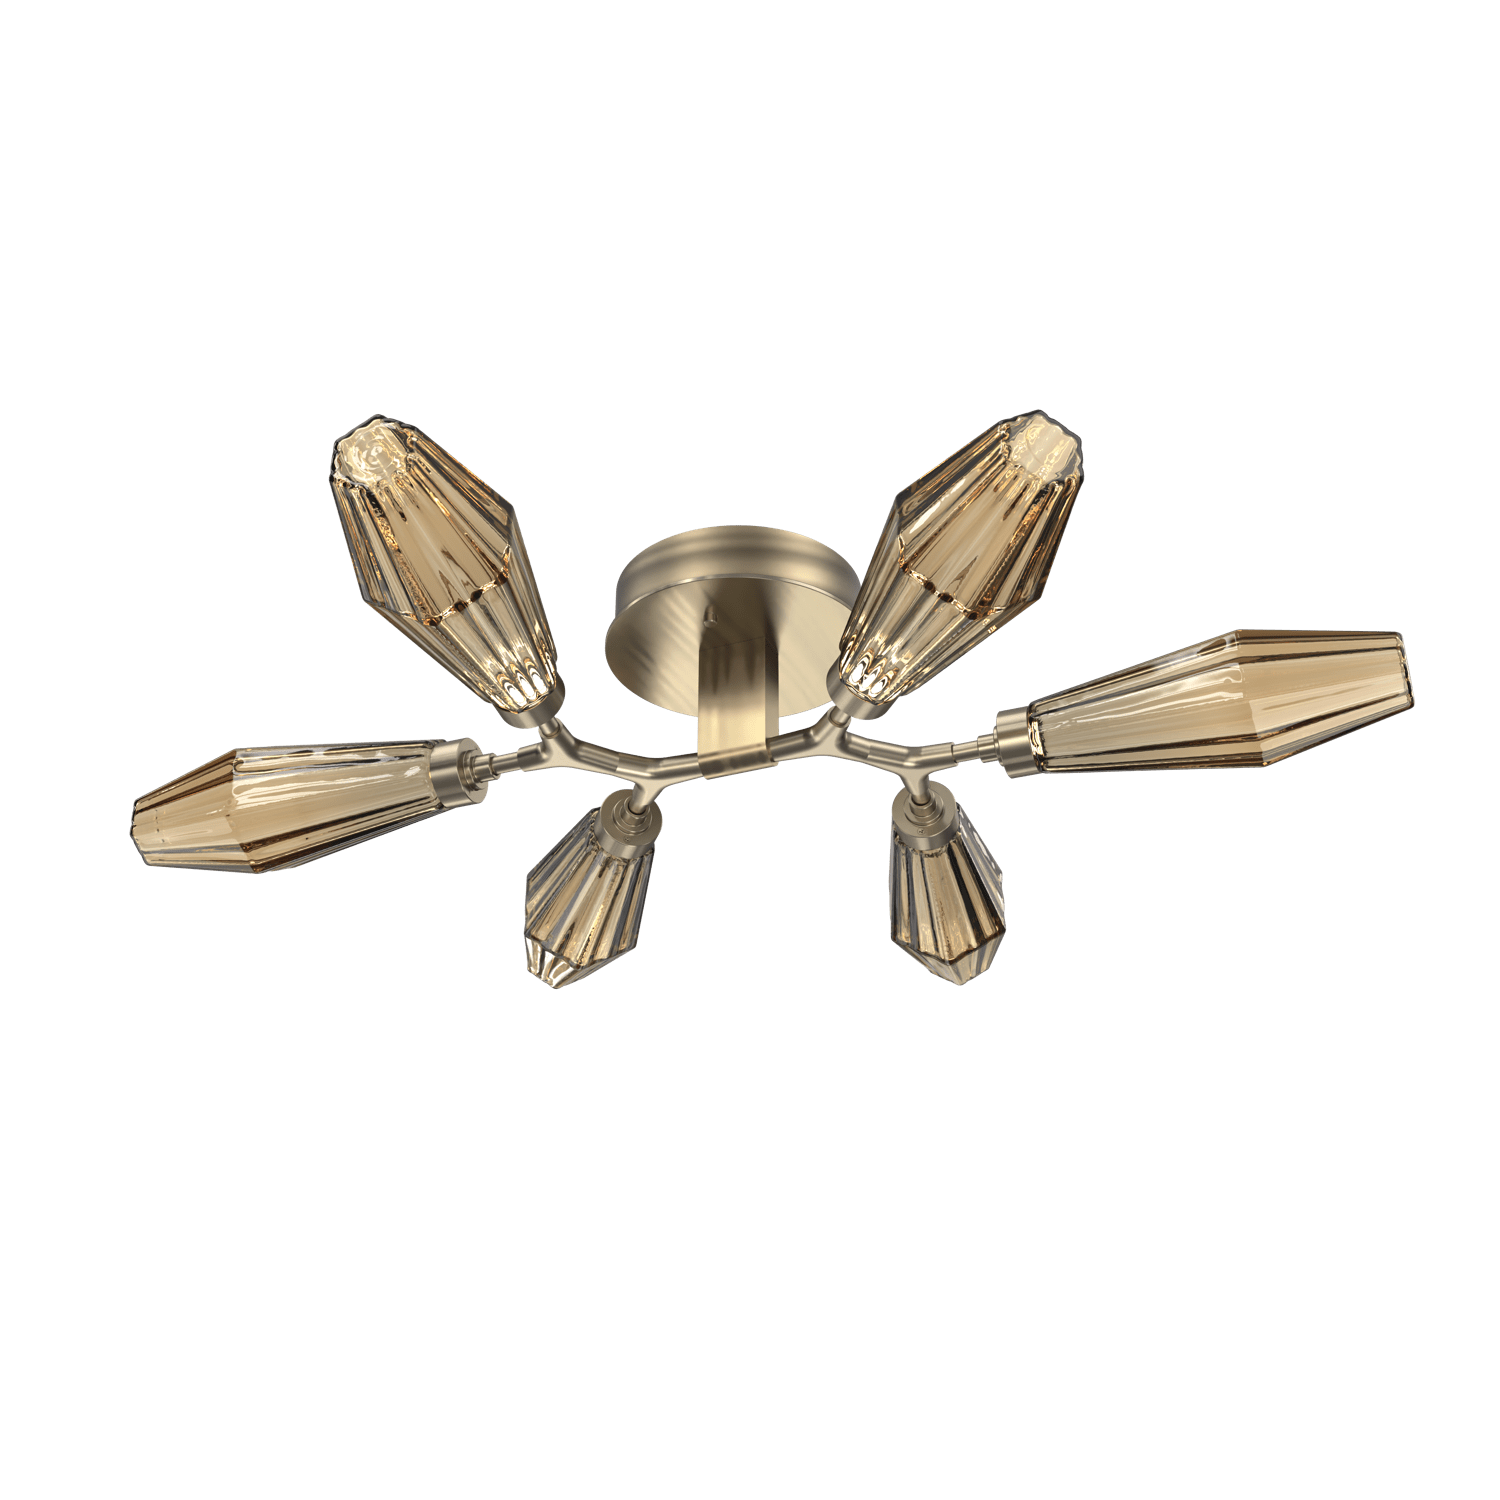 CLB0049-01-HB-RB-Hammerton-Studio-Aalto-6-light-organic-flush-mount-light-with-heritage-brass-finish-and-optic-ribbed-bronze-glass-shades-and-LED-lamping